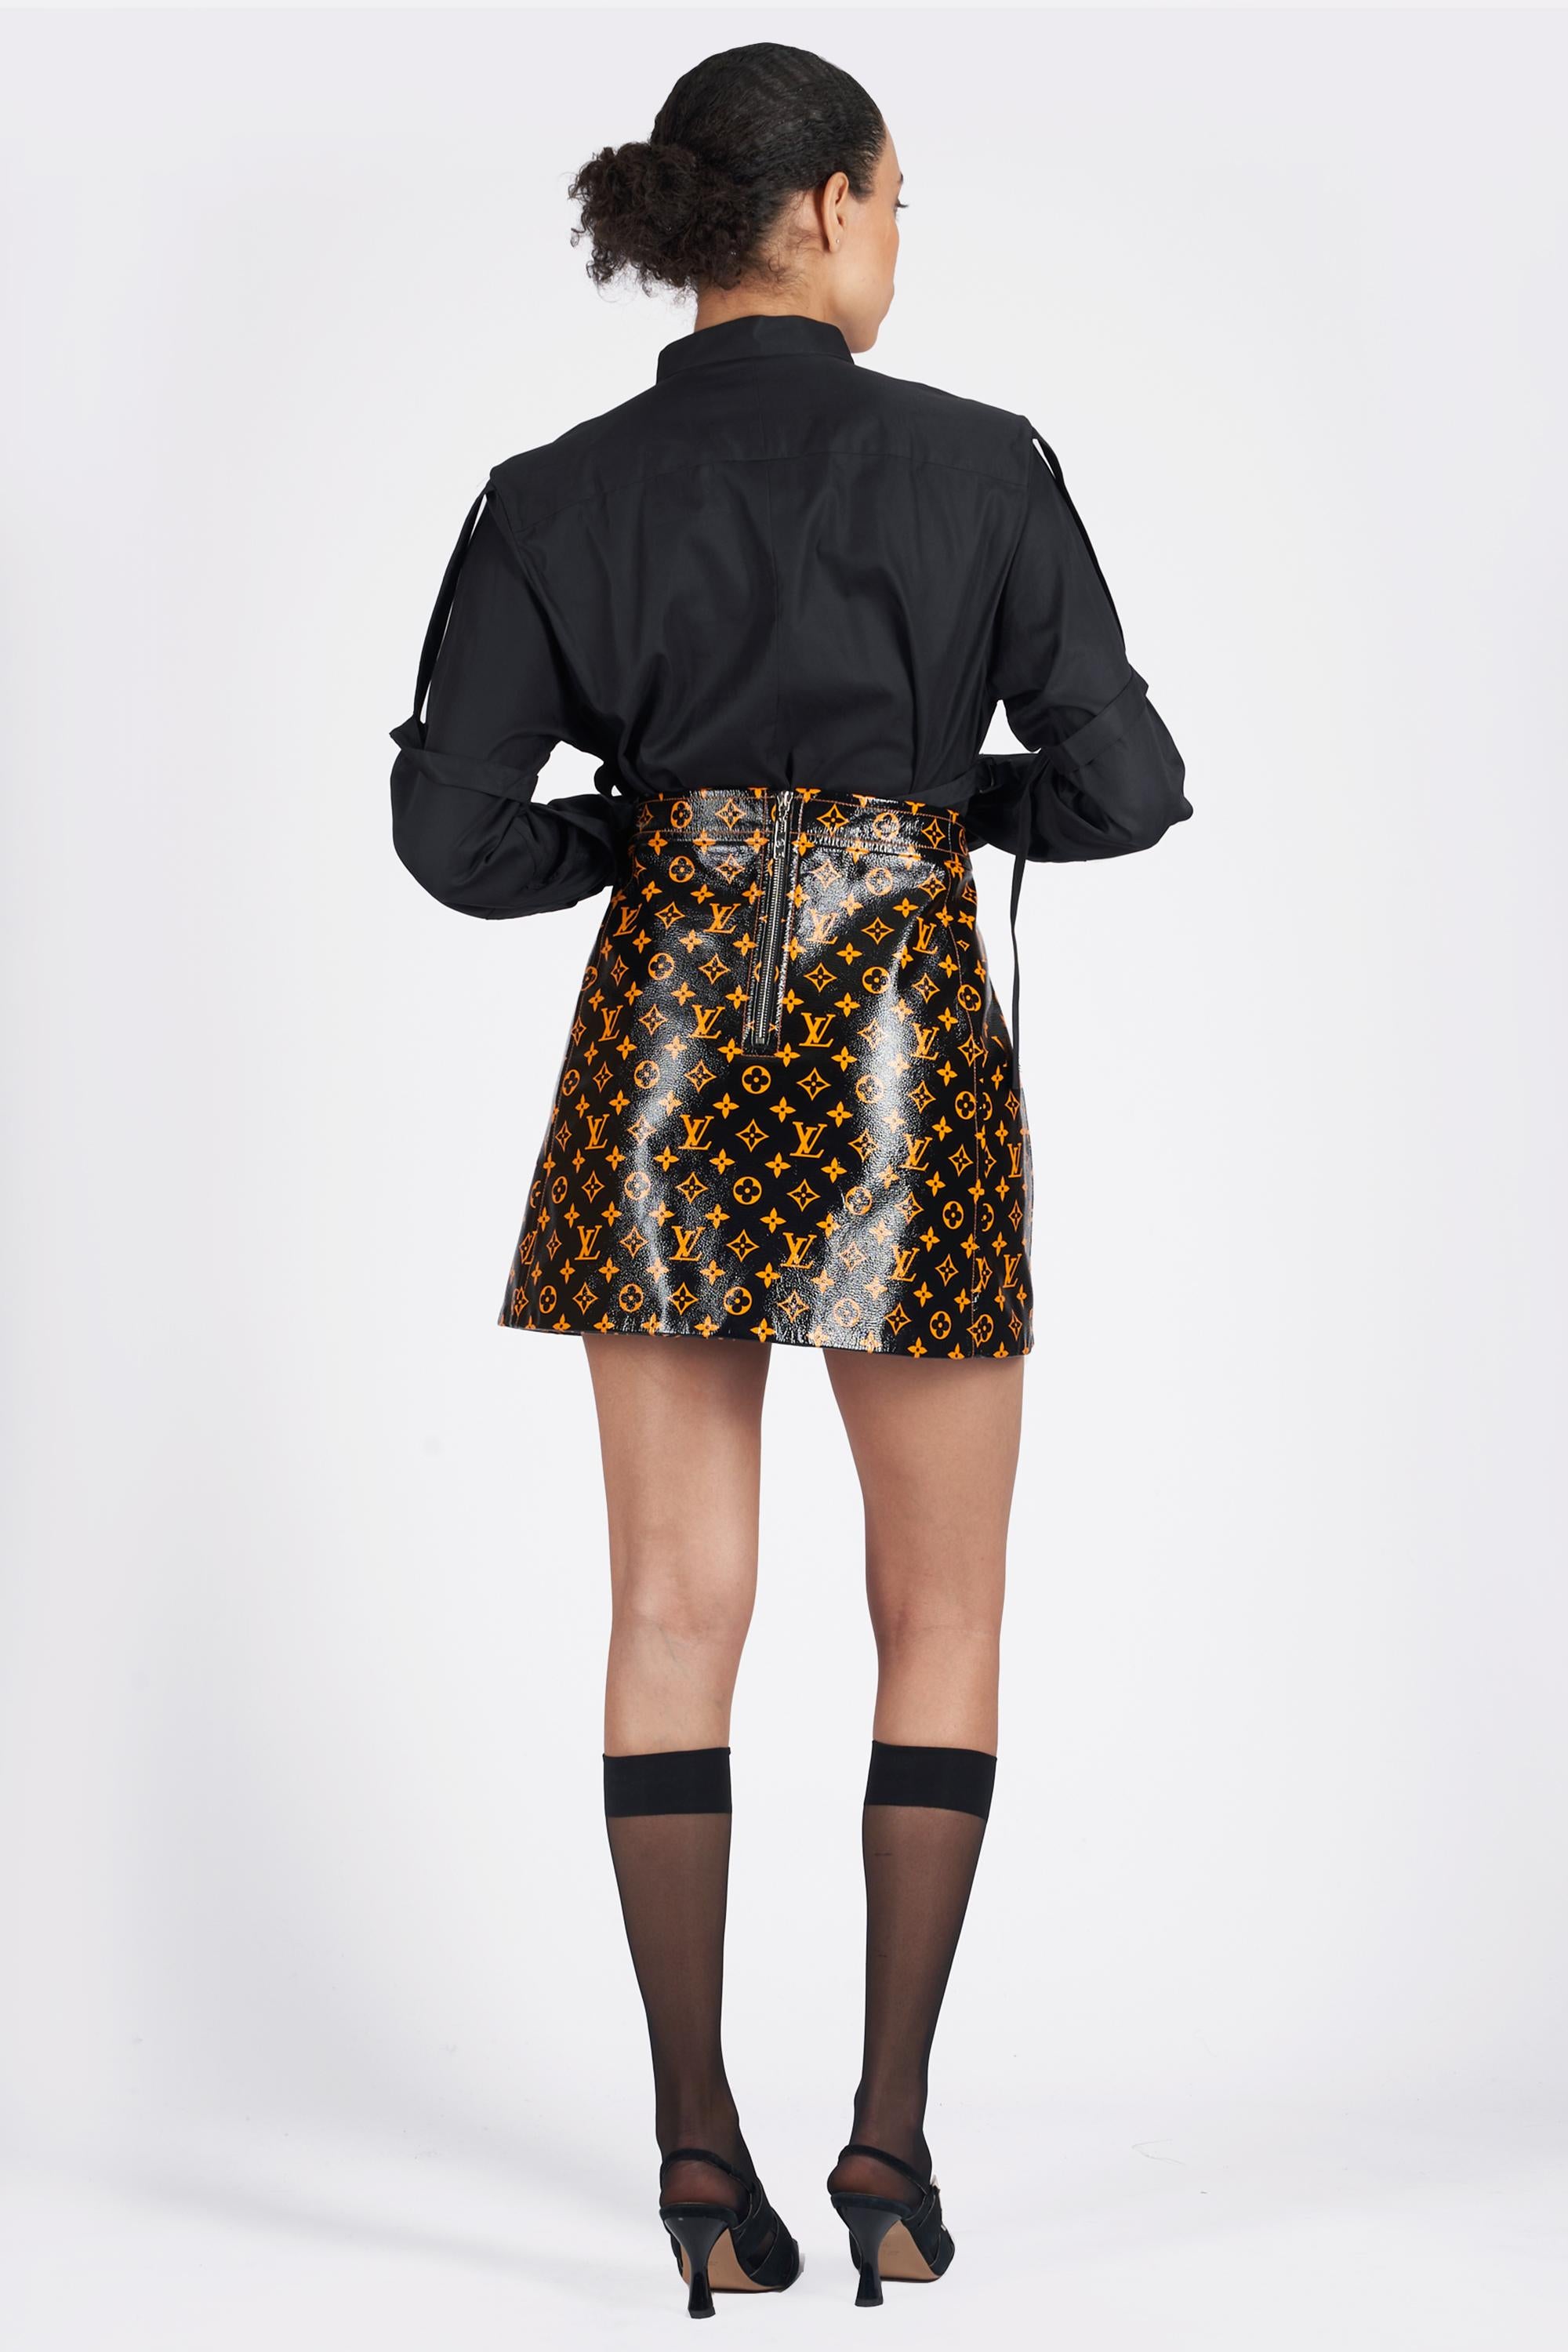 We are excited to present this Louis Vuitton 2020 patent leather mini skirt. Features monogram print all over in orange, a line fit and zip on back for closure. In excellent vintage condition. As seen on Sophie Turner and Hailey Bieber. Authenticity